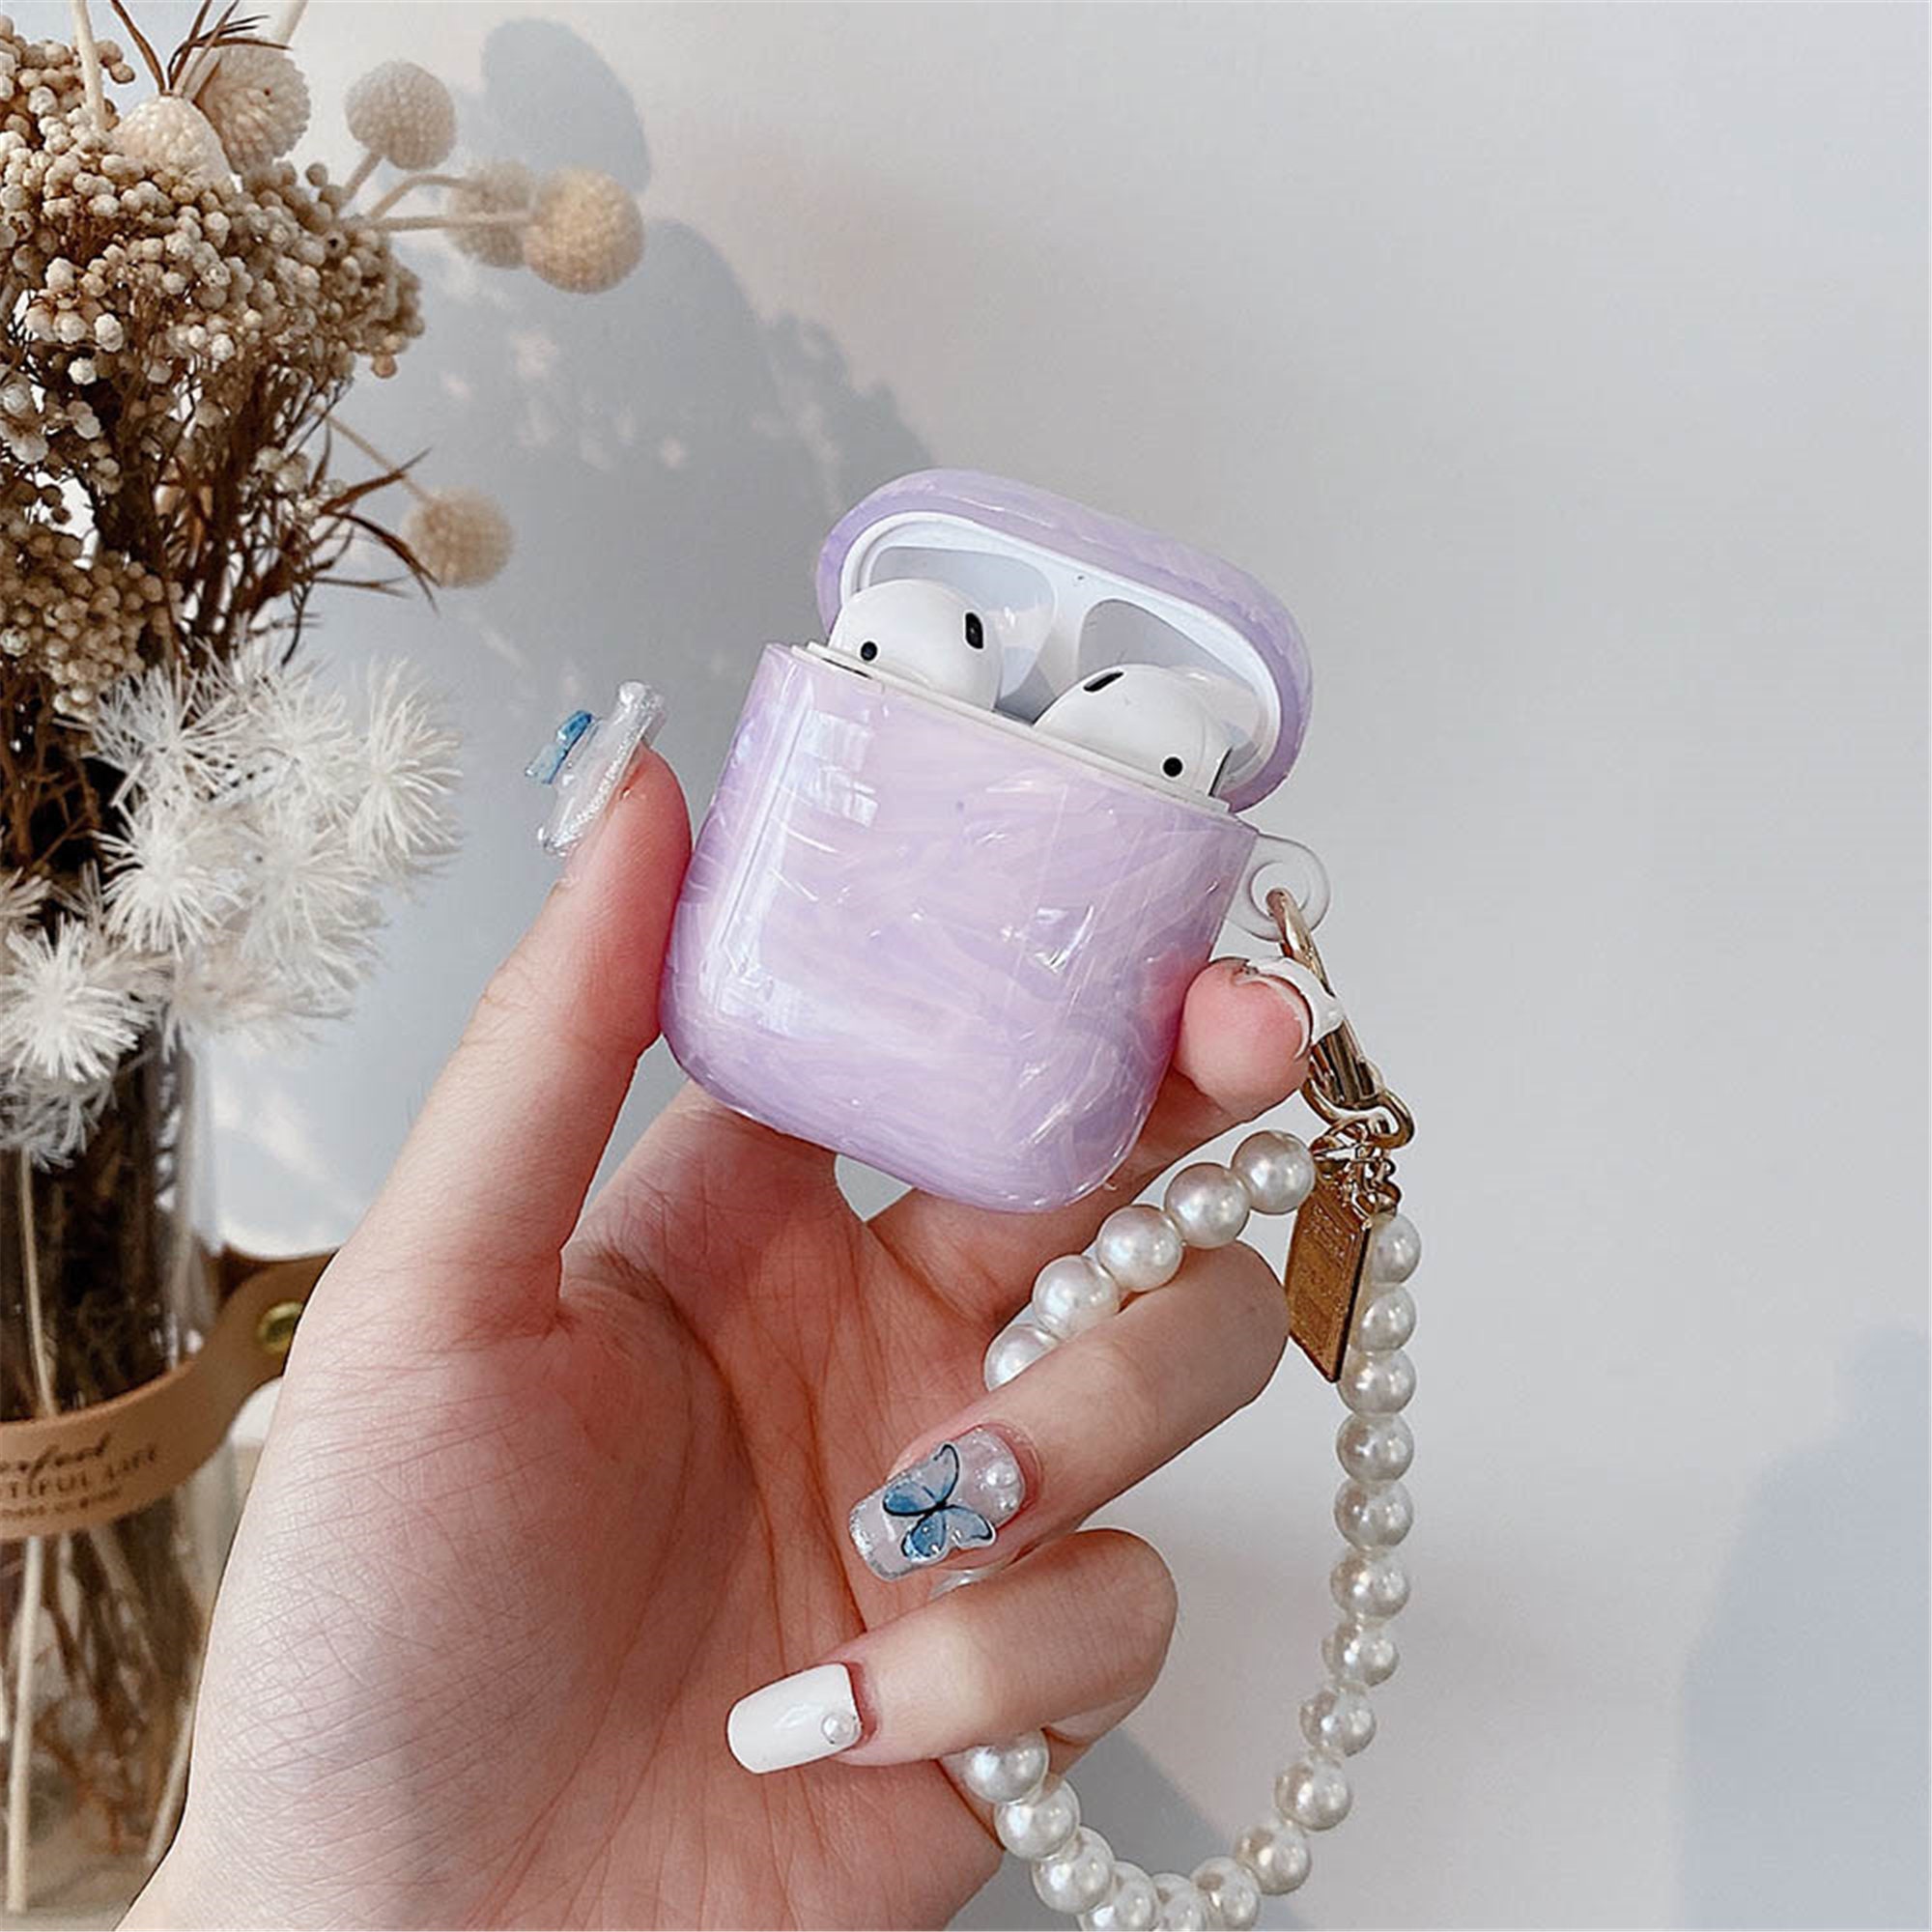 Airpod case for generation 1/2pro Cute Luxury Purple Conch | Etsy